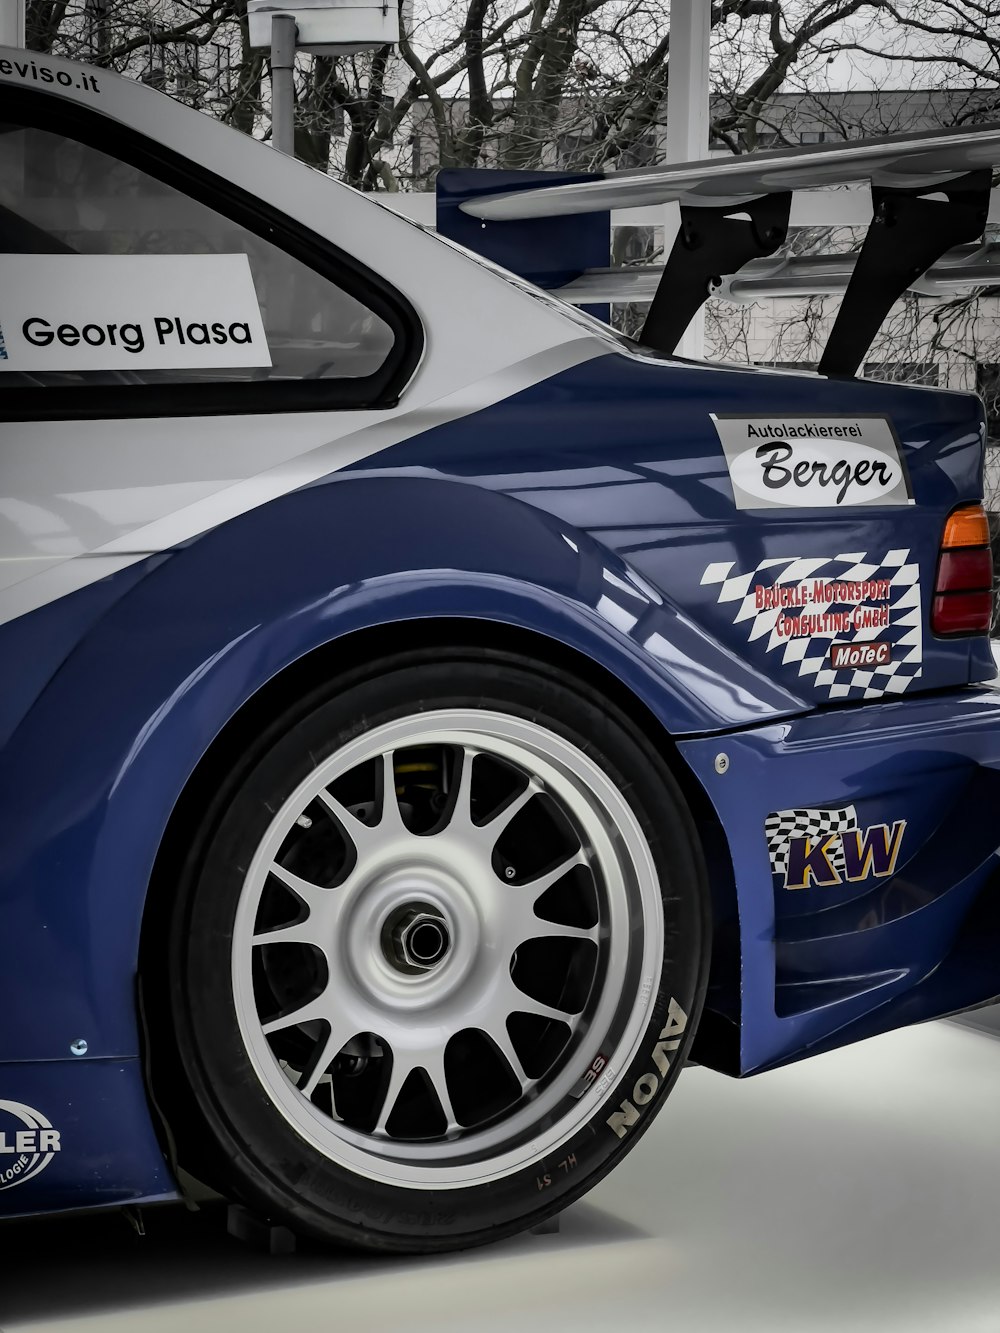 a close up of the rear end of a race car